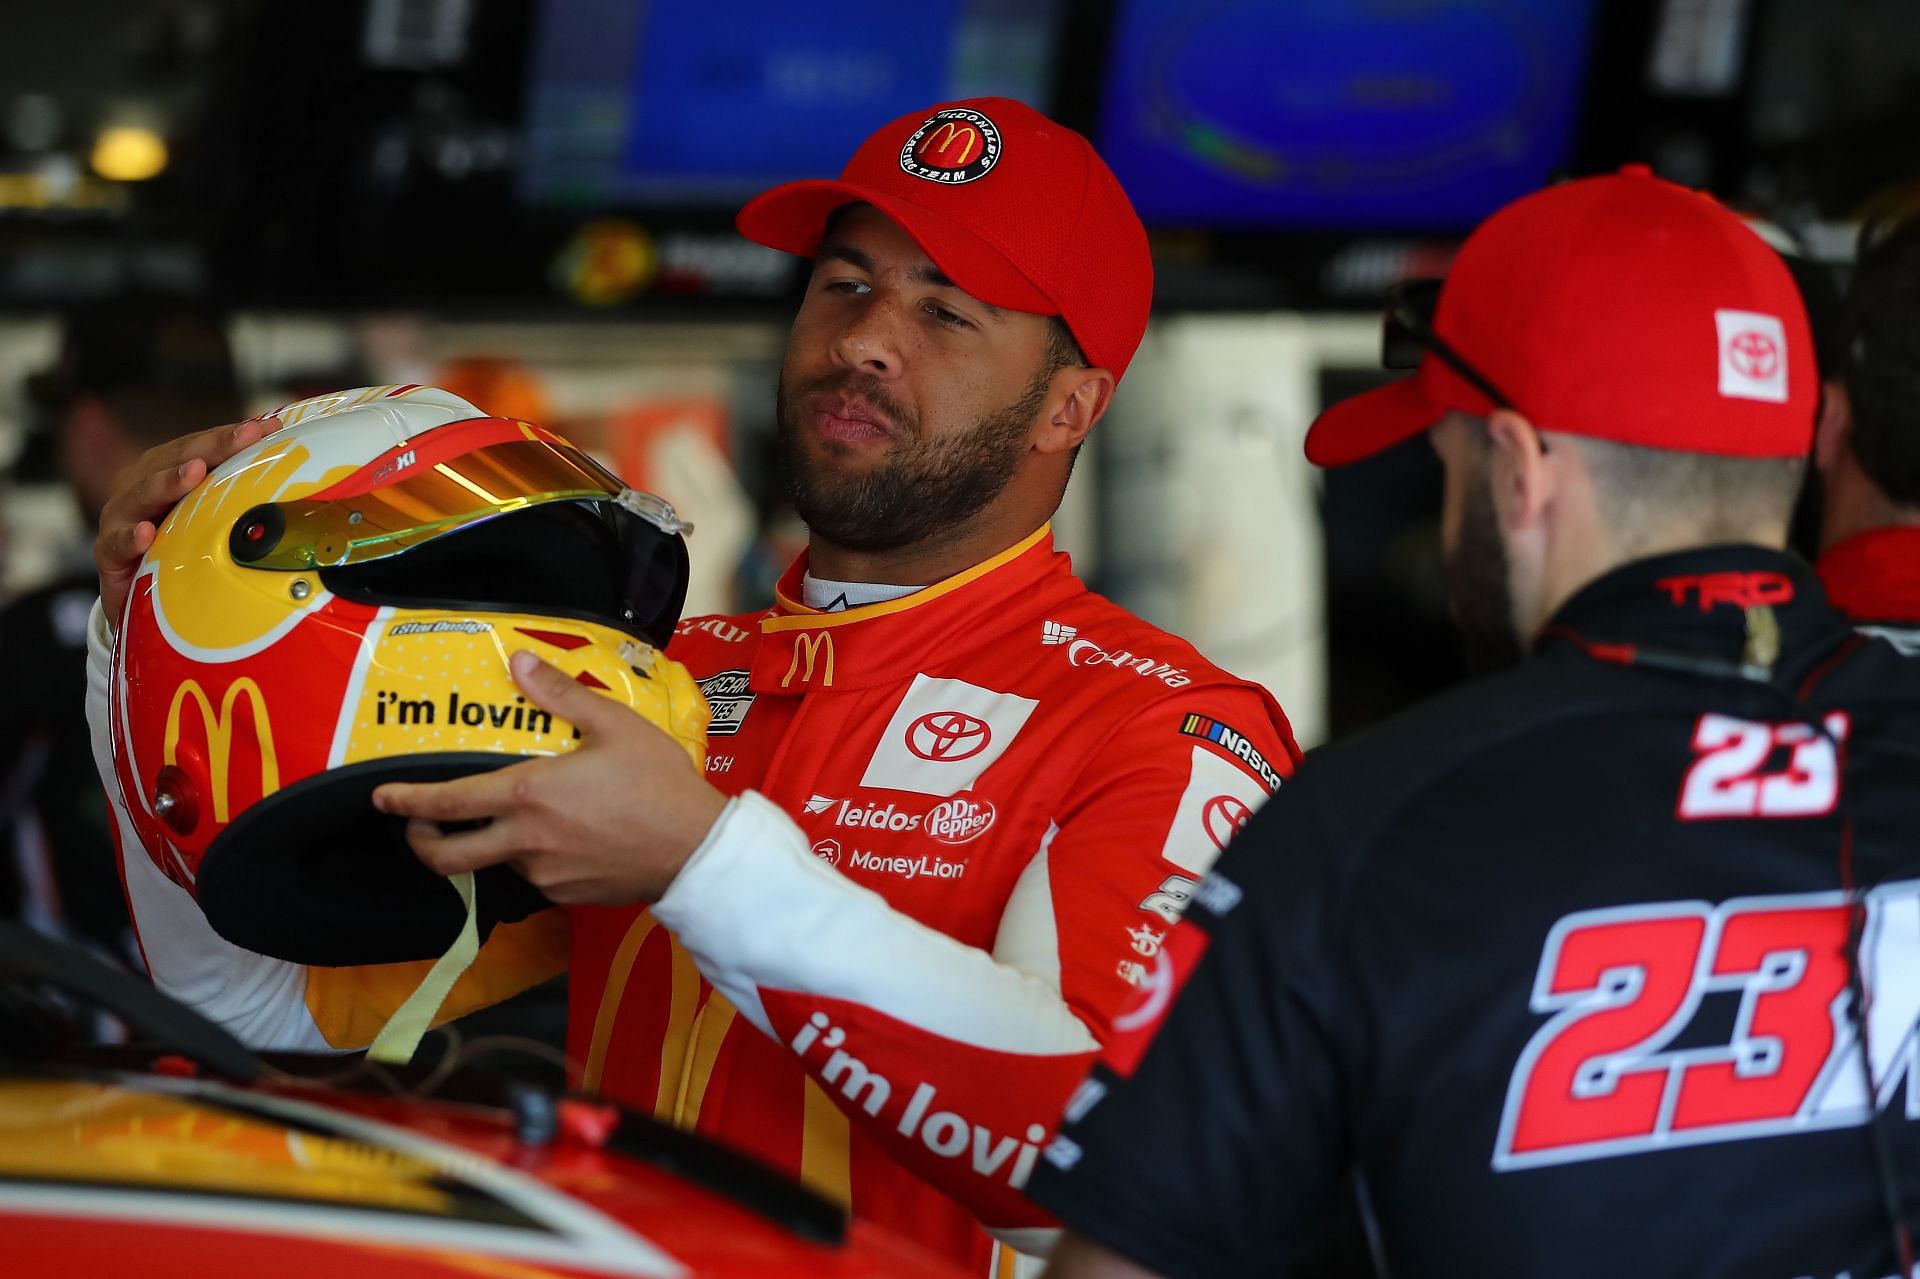 Bubba Wallace Jr. at NASCAR Cup Series Folds of Honor QuikTrip 500 - Practice